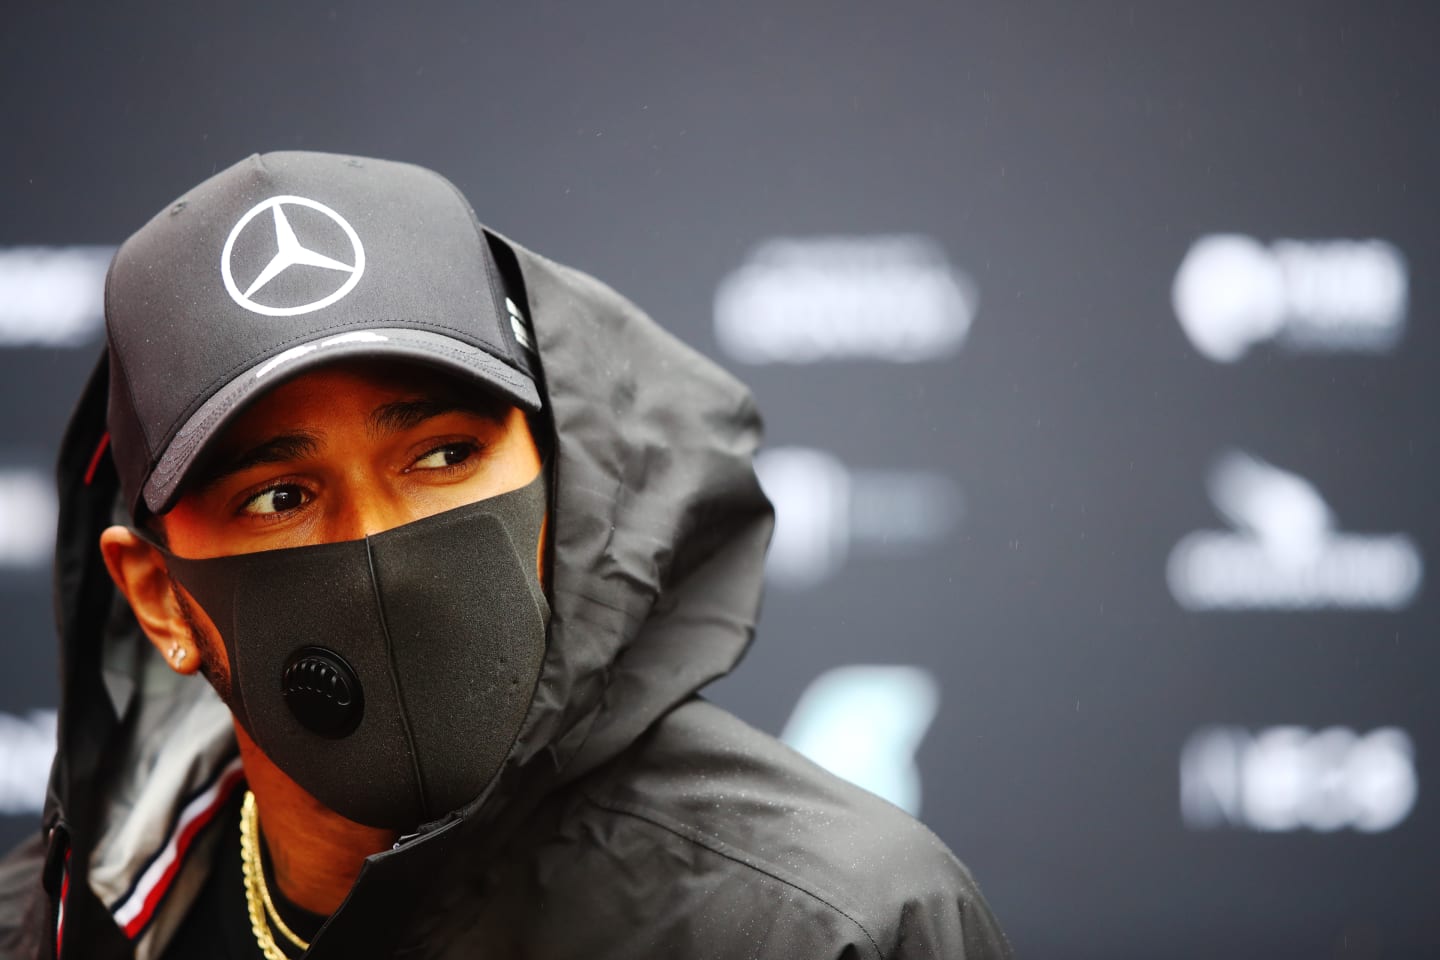 NUERBURG, GERMANY - OCTOBER 08: Lewis Hamilton of Great Britain and Mercedes GP looks on in the